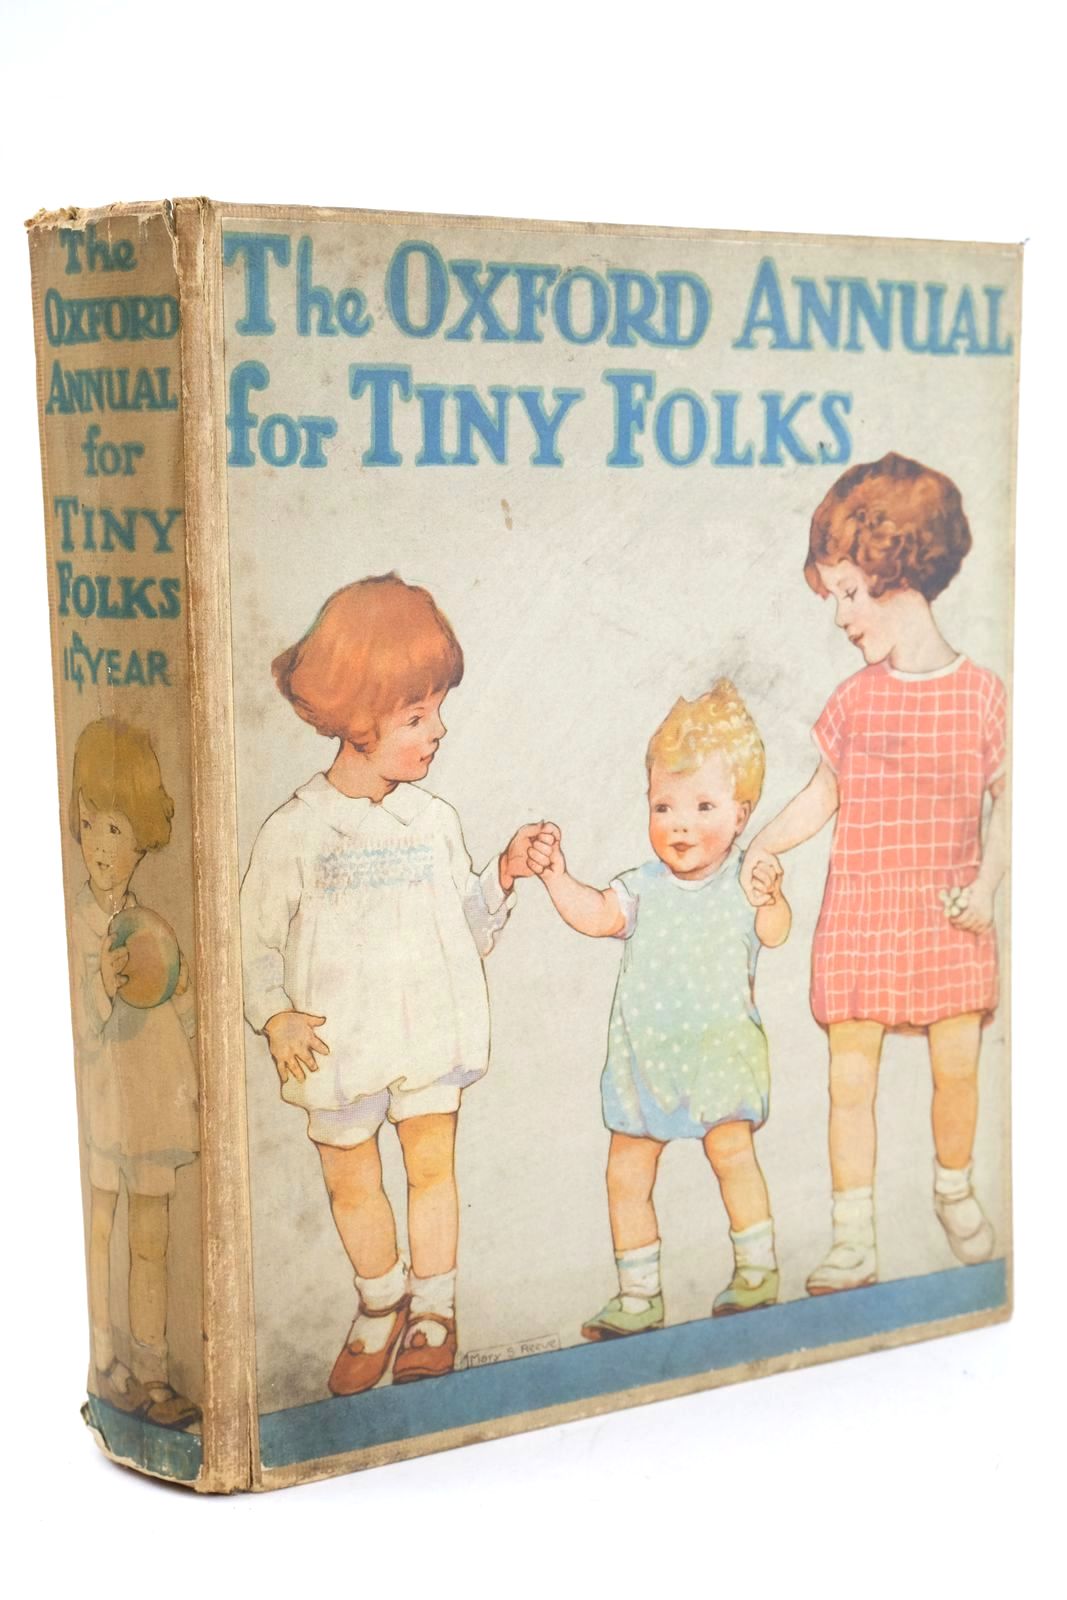 Photo of THE OXFORD ANNUAL FOR TINY FOLKS 14TH YEAR written by Strang, Mrs. Herbert et al, illustrated by Beaman, S.G. Hulme Harrison, Florence Anderson, Anne Rees, E. Dorothy et al., published by Oxford University Press, Humphrey Milford (STOCK CODE: 1324835)  for sale by Stella & Rose's Books